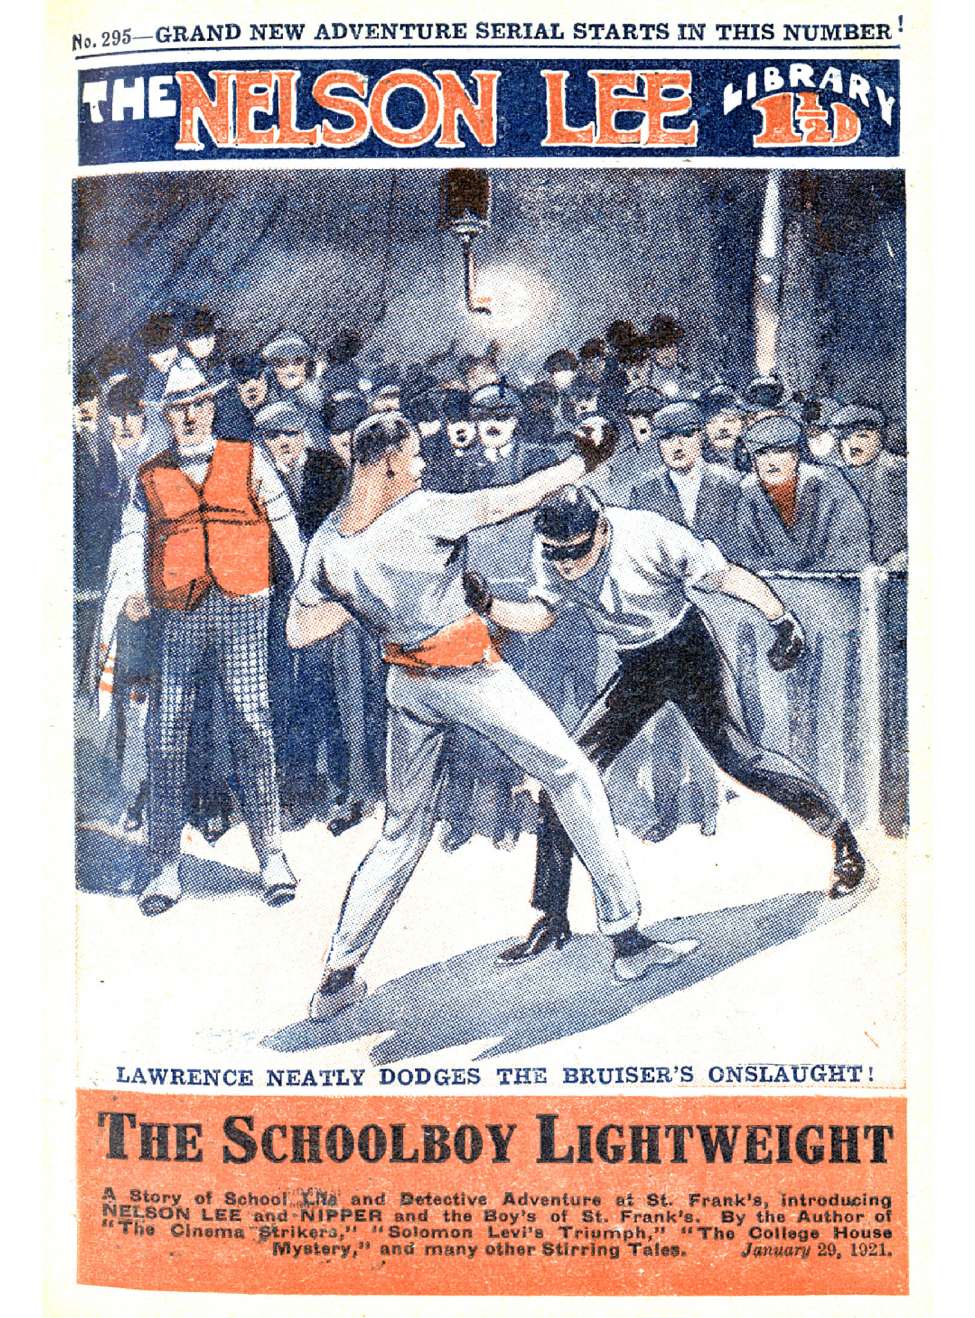 Book Cover For Nelson Lee Library s1 295 - The Schoolboy Lightweight